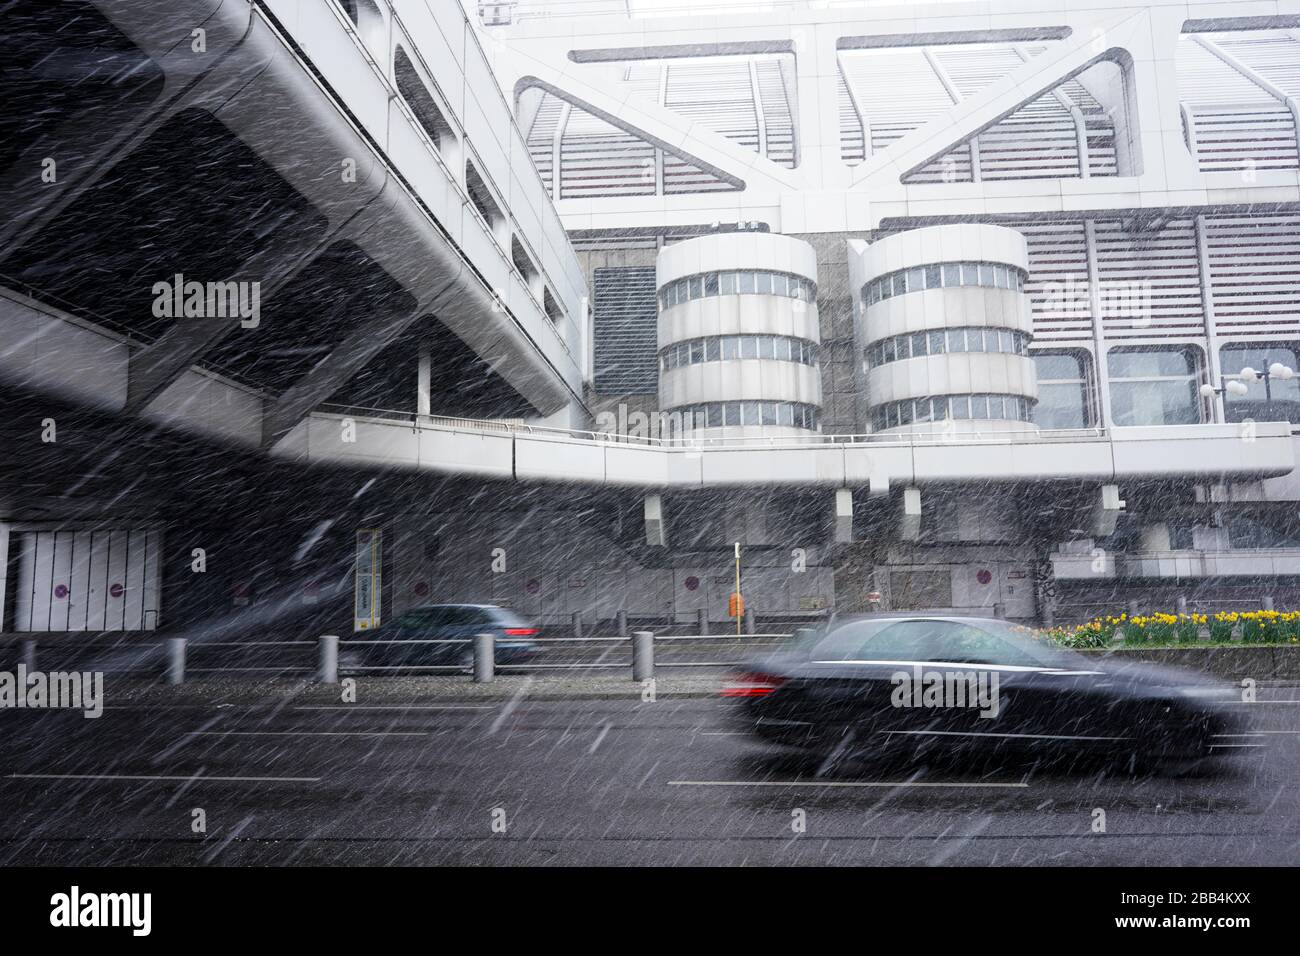 Berlin, Germany. 30th Mar, 2020. Snowflakes fall from the sky and impair the view in front of the International Congress Centre (ICC) for motorists. Credit: Jörg Carstensen/dpa/Alamy Live News Stock Photo